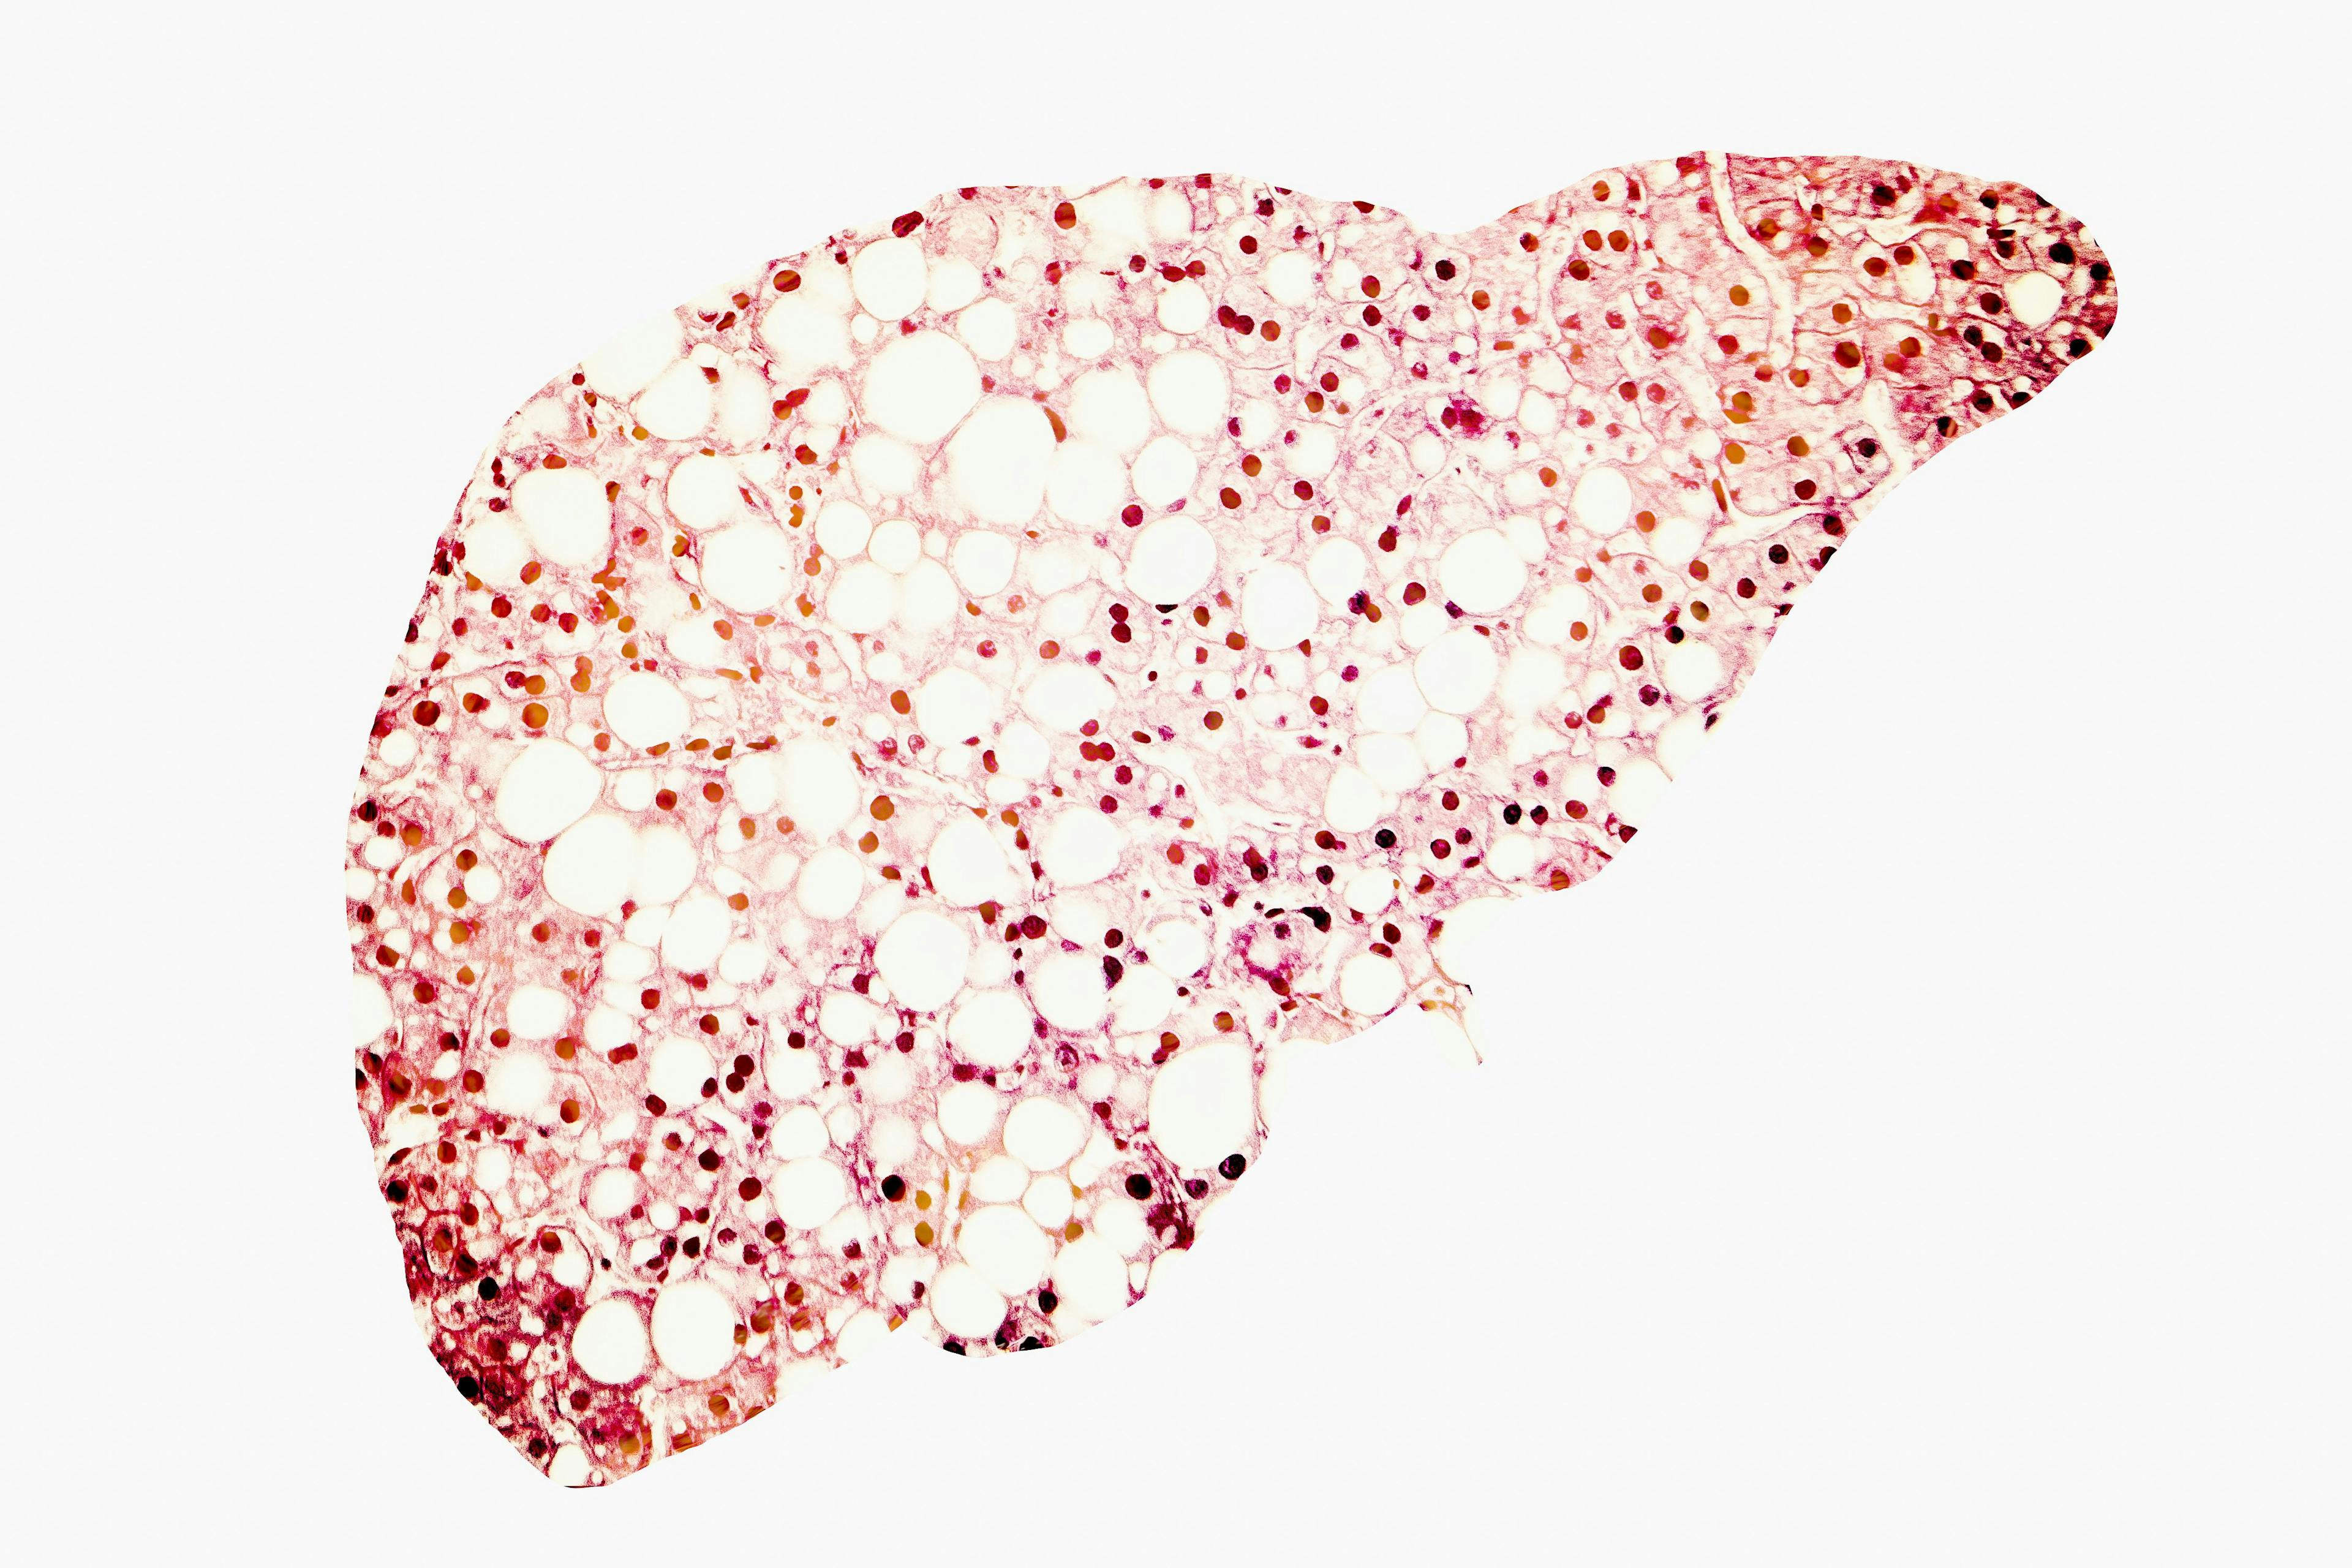 Patients with advanced hepatocellular carcinoma who received prior treatment with sorafenib appear to benefit from treatment with pembrolizumab and best supportive care.